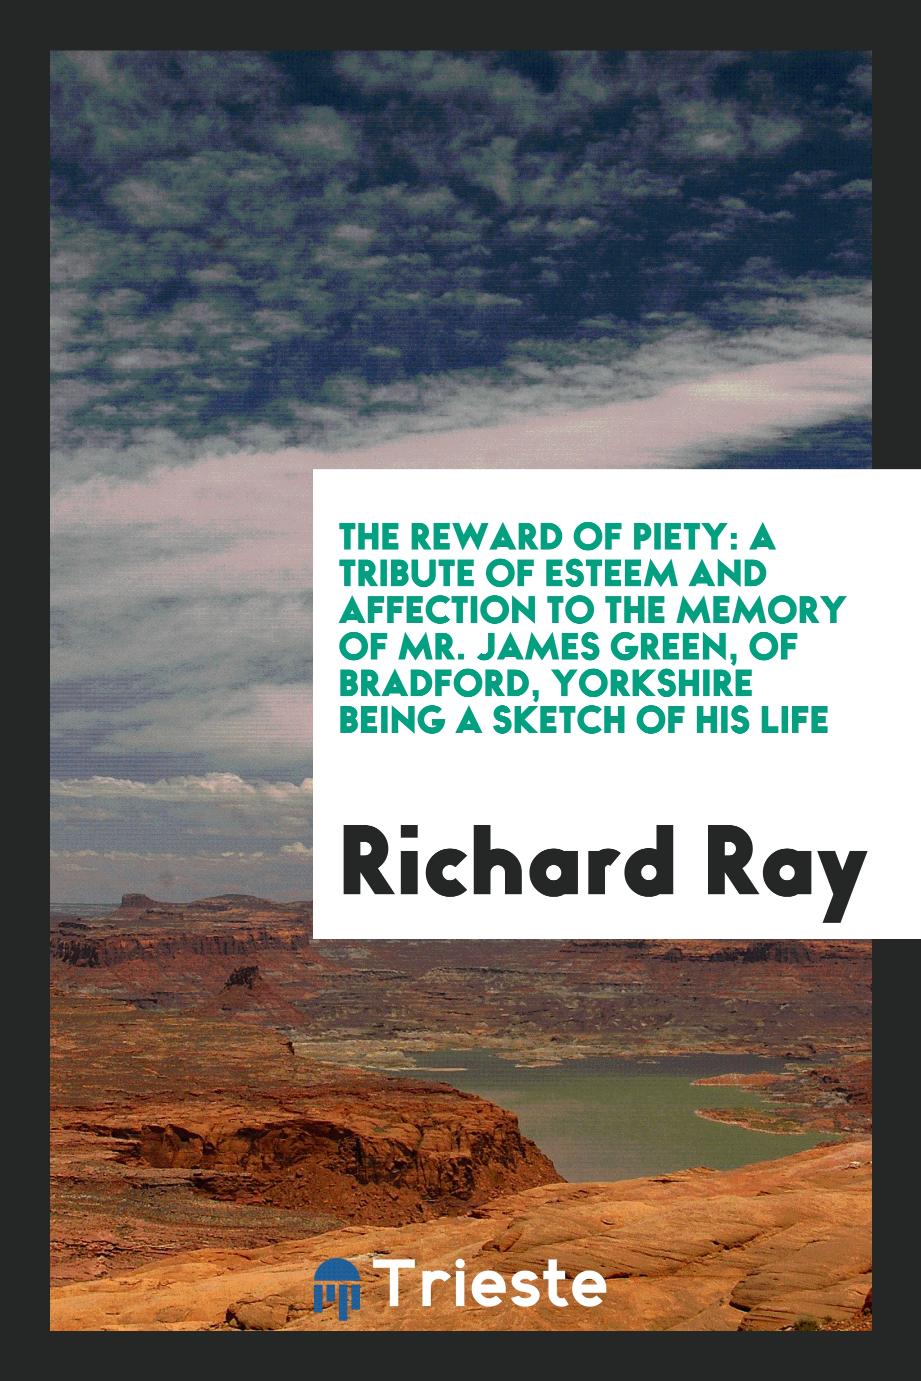 The Reward of Piety: A Tribute of Esteem and Affection to the Memory of Mr. James Green, of Bradford, Yorkshire Being a Sketch of His Life